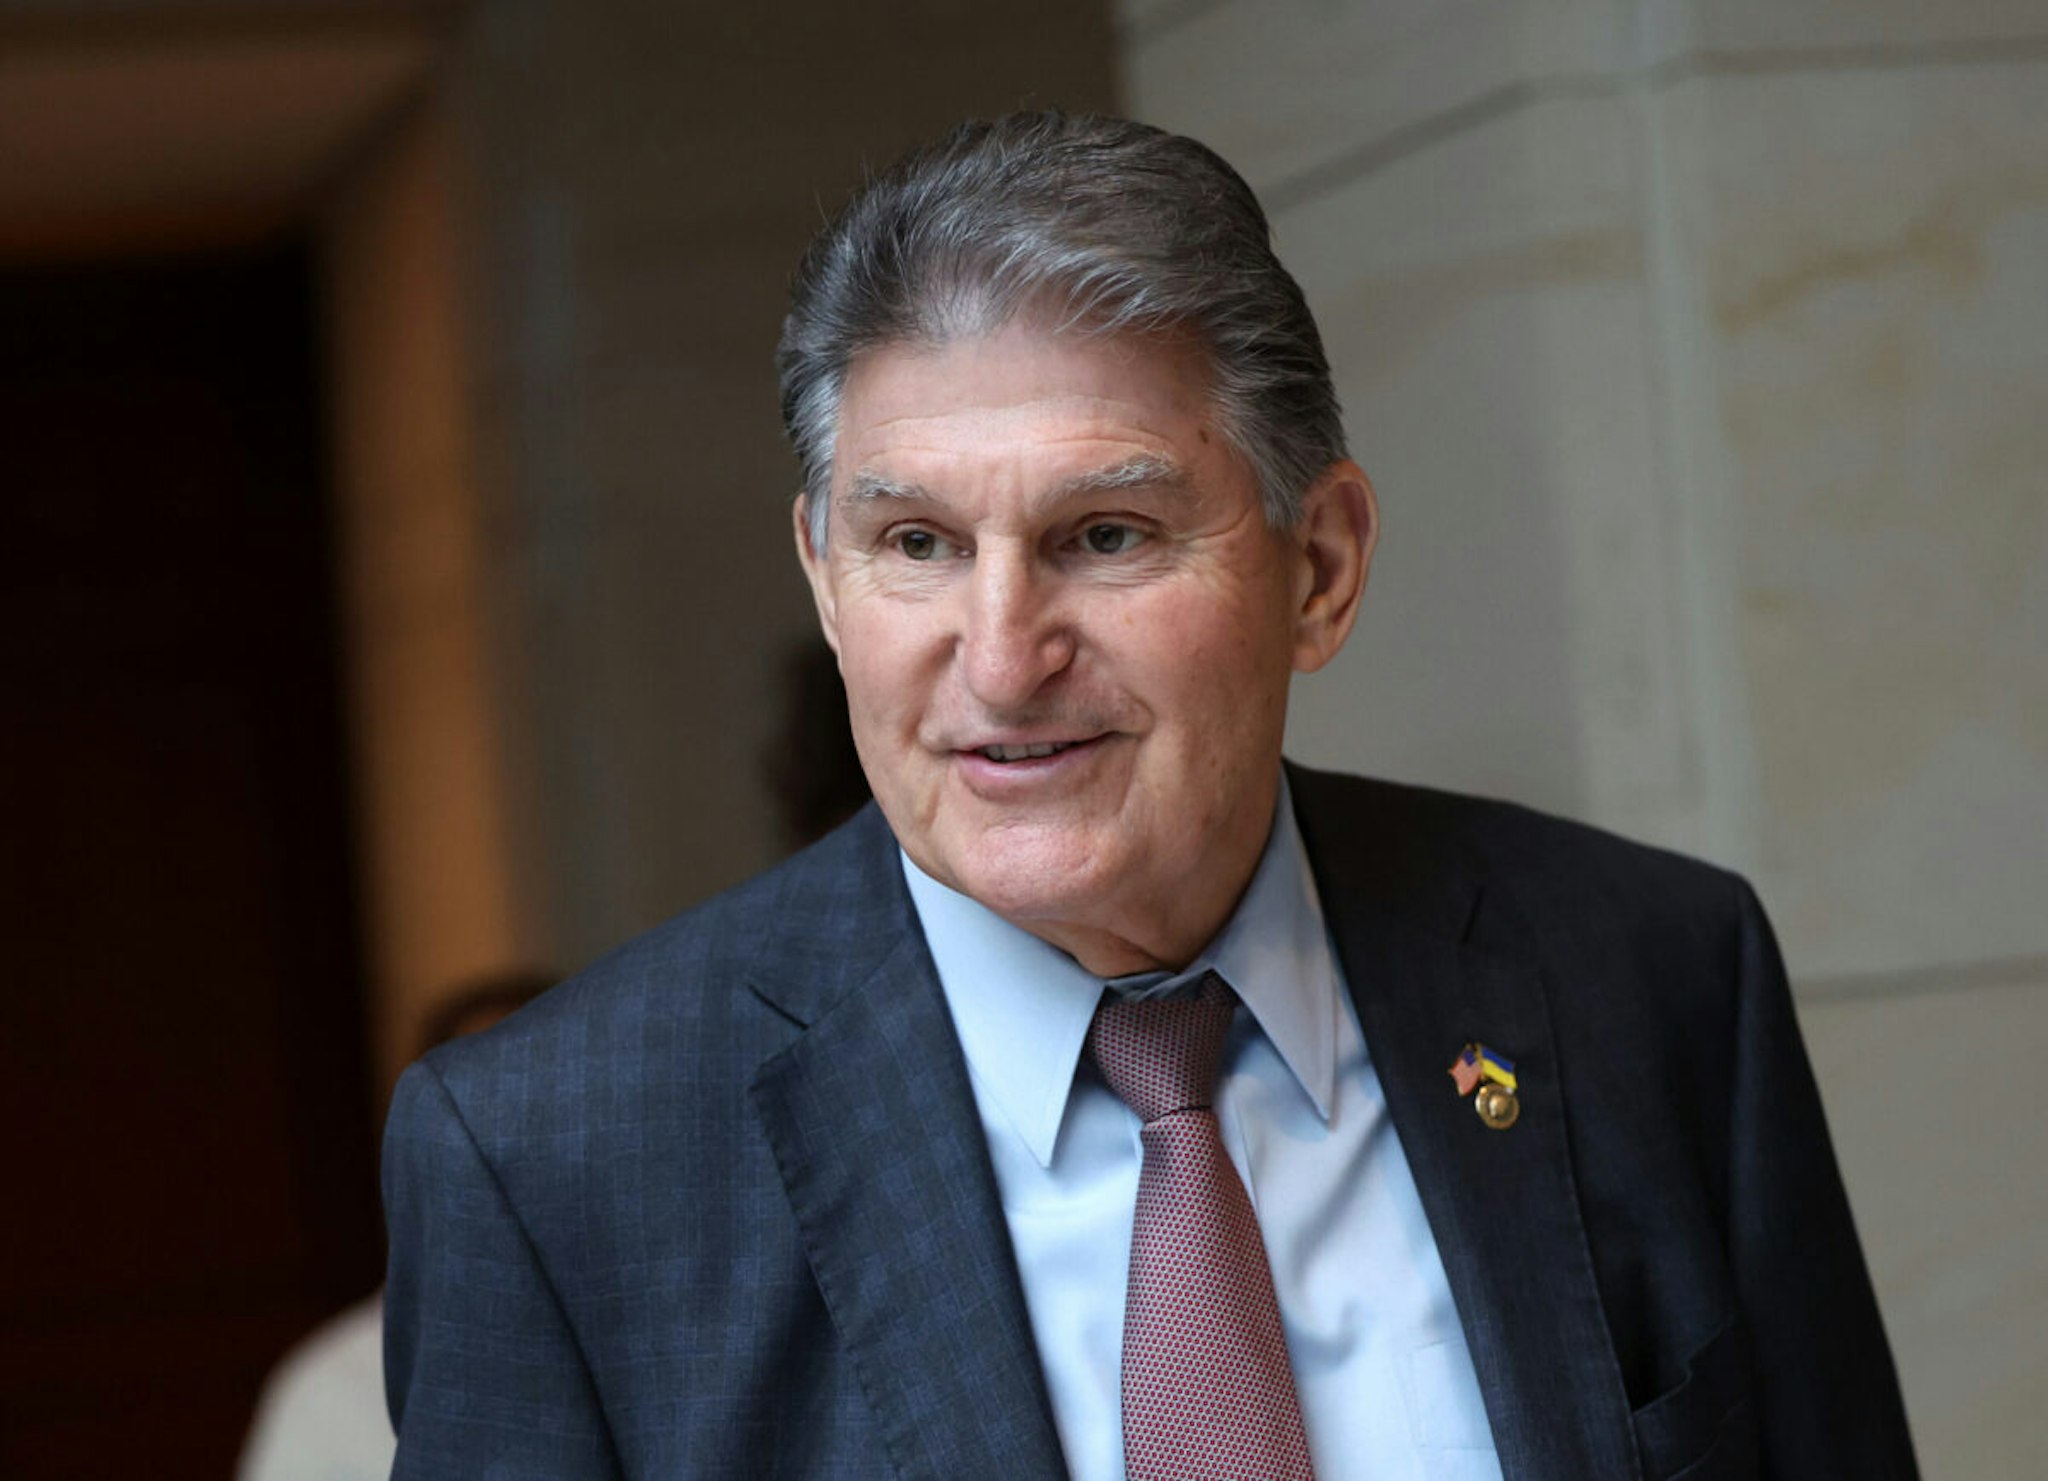 WASHINGTON, DC - FEBRUARY 15: U.S. Sen. Joe Manchin (D-WV) arrives for a Senate briefing on China at the U.S Capitol on February 15, 2023 in Washington, DC. Members of the Biden administration, including representatives from the Defense Department, briefed Senators on China and the recent suspected spy balloon that was shot down.